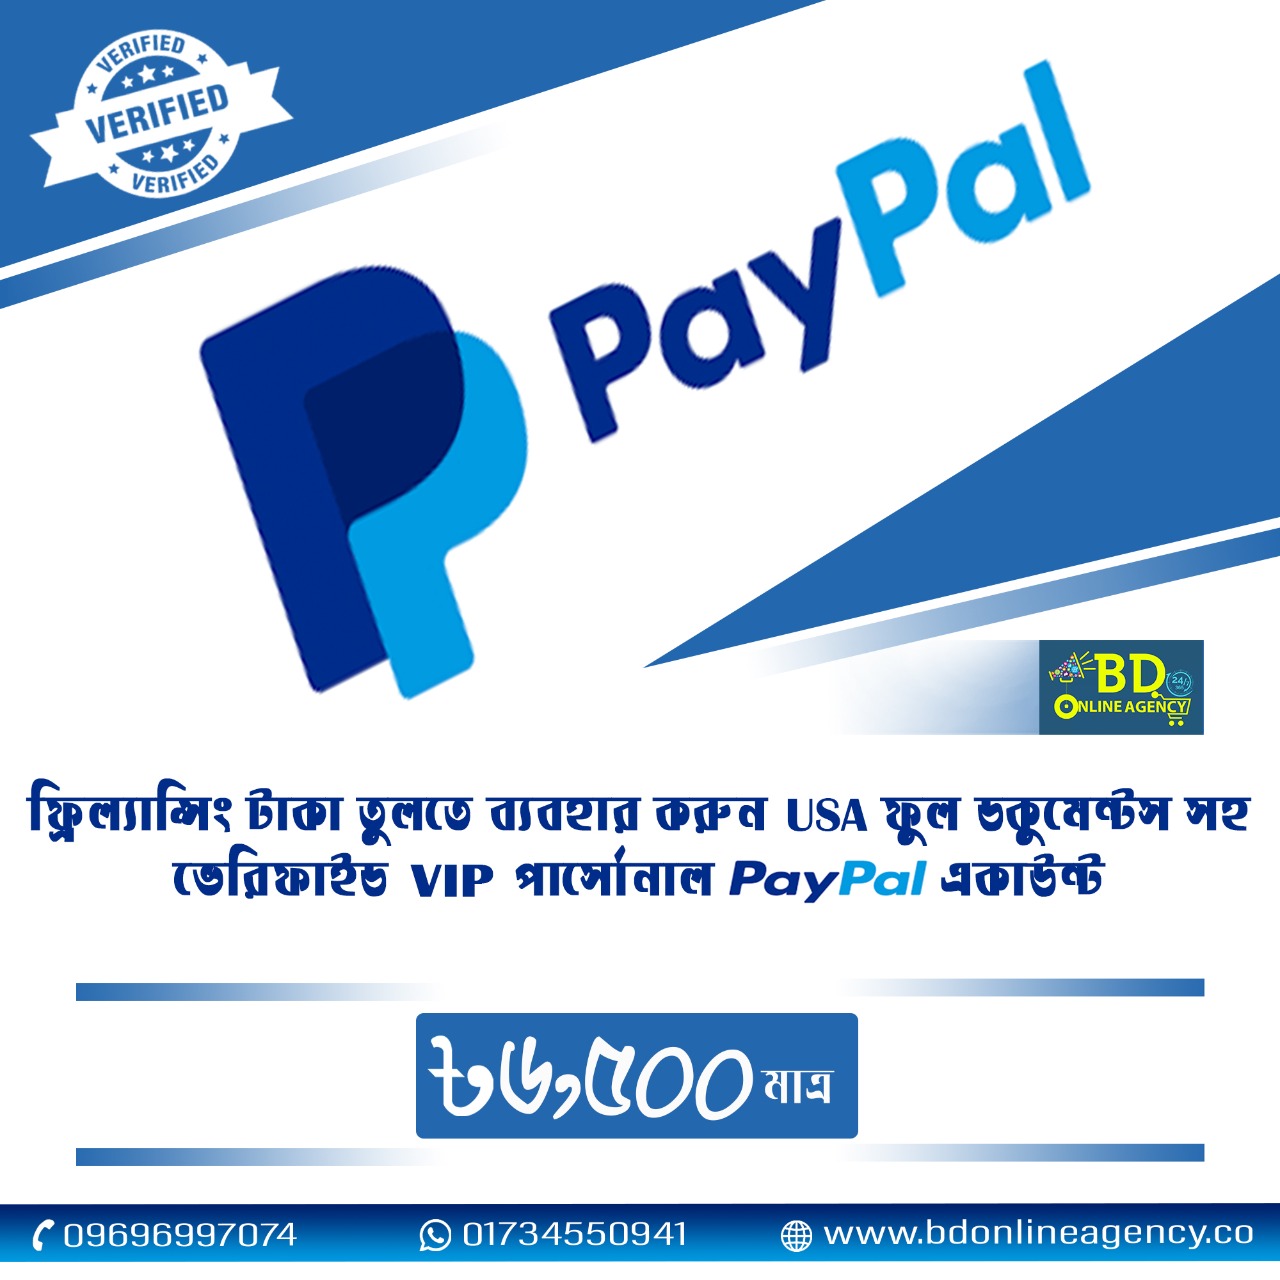 How can Bangladeshi users operate a PayPal account?